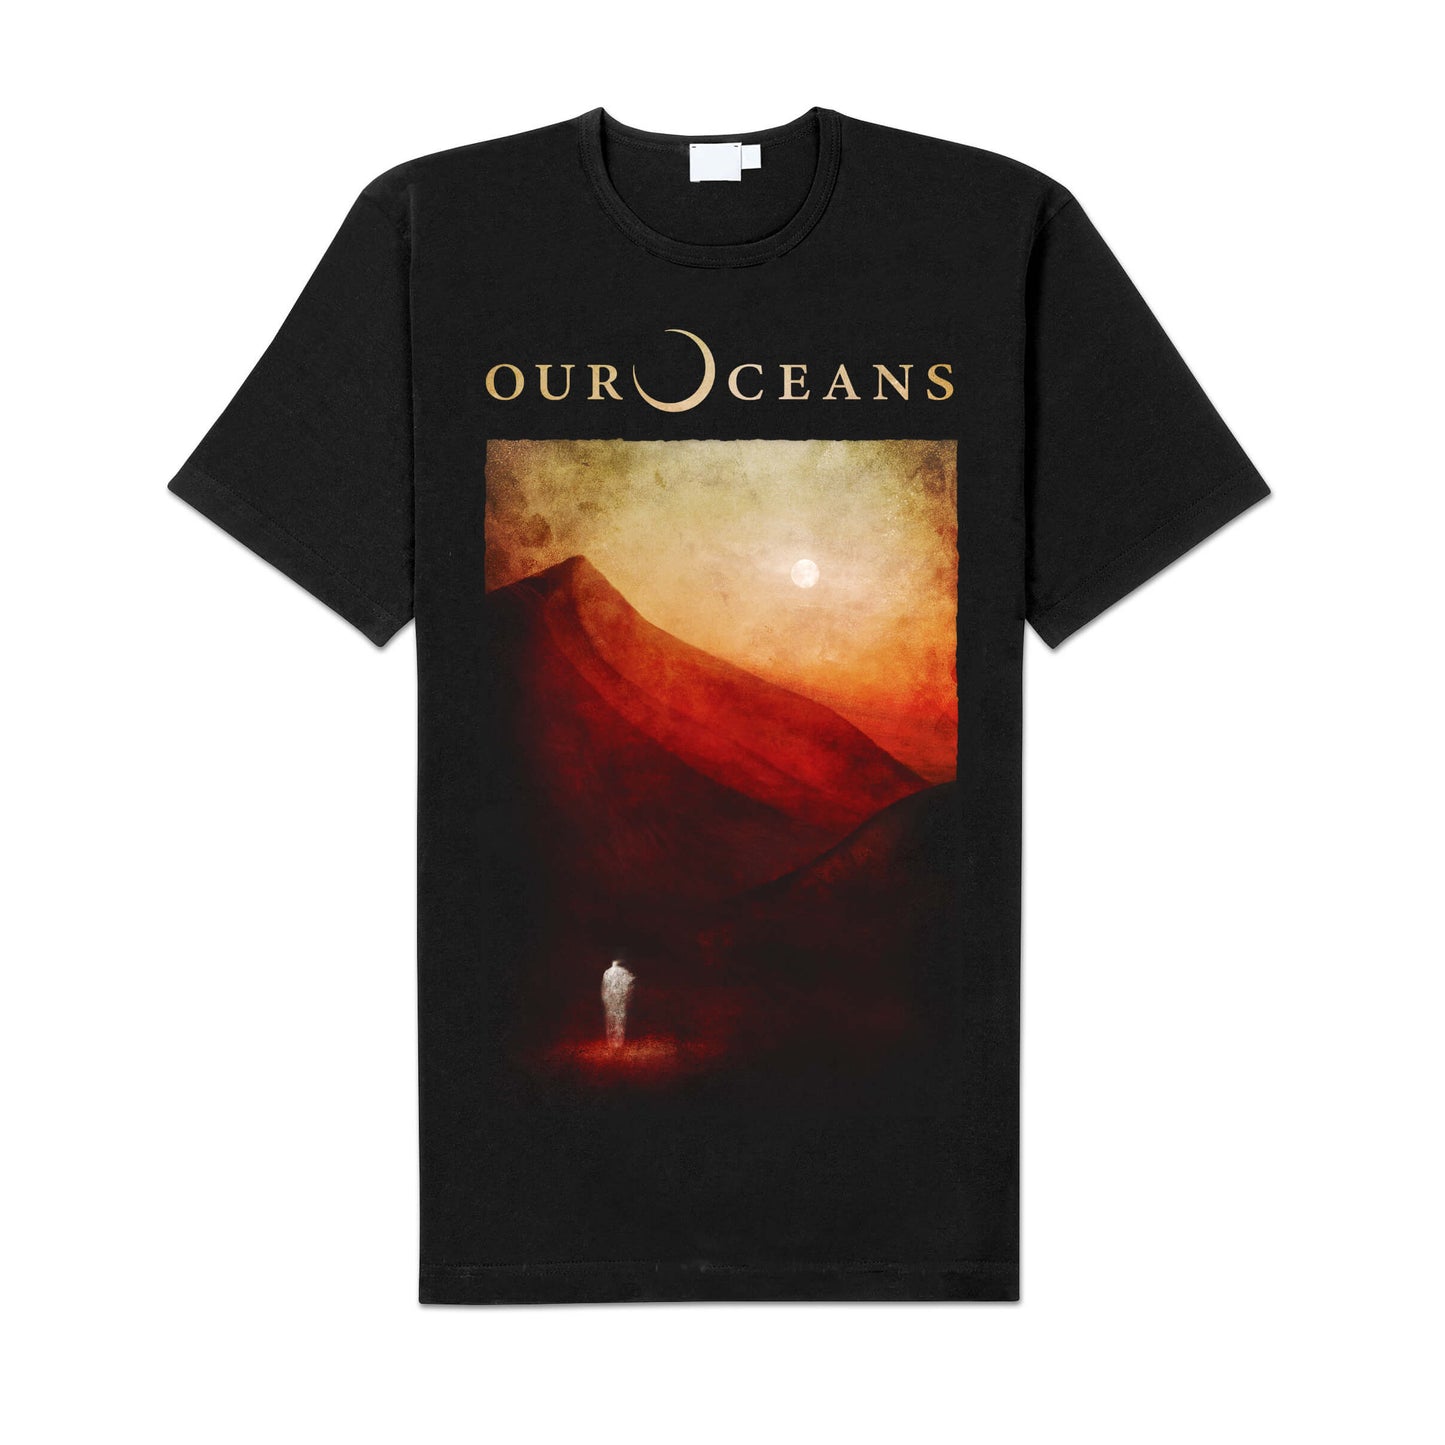 Our Oceans "While Time Disappears" LP-Bundle "Doom"